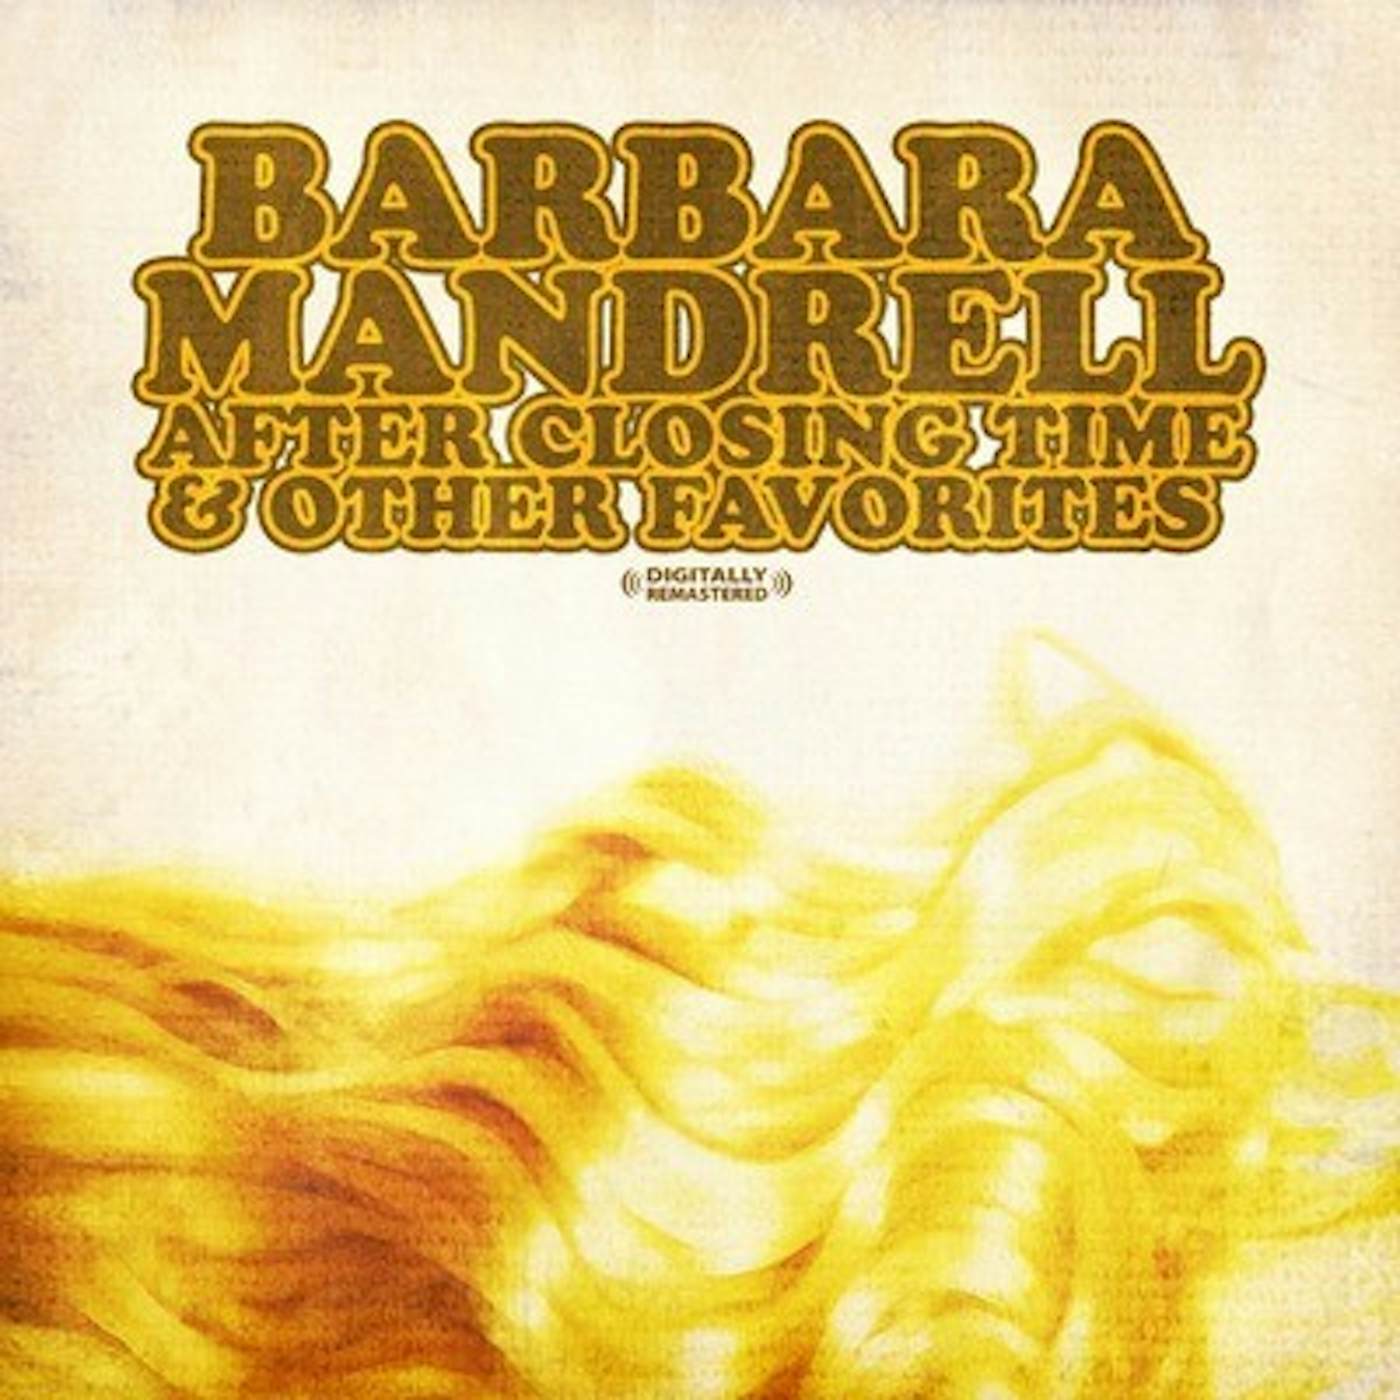 Barbara Mandrell AFTER CLOSING TIME & OTHER FAVORITES CD